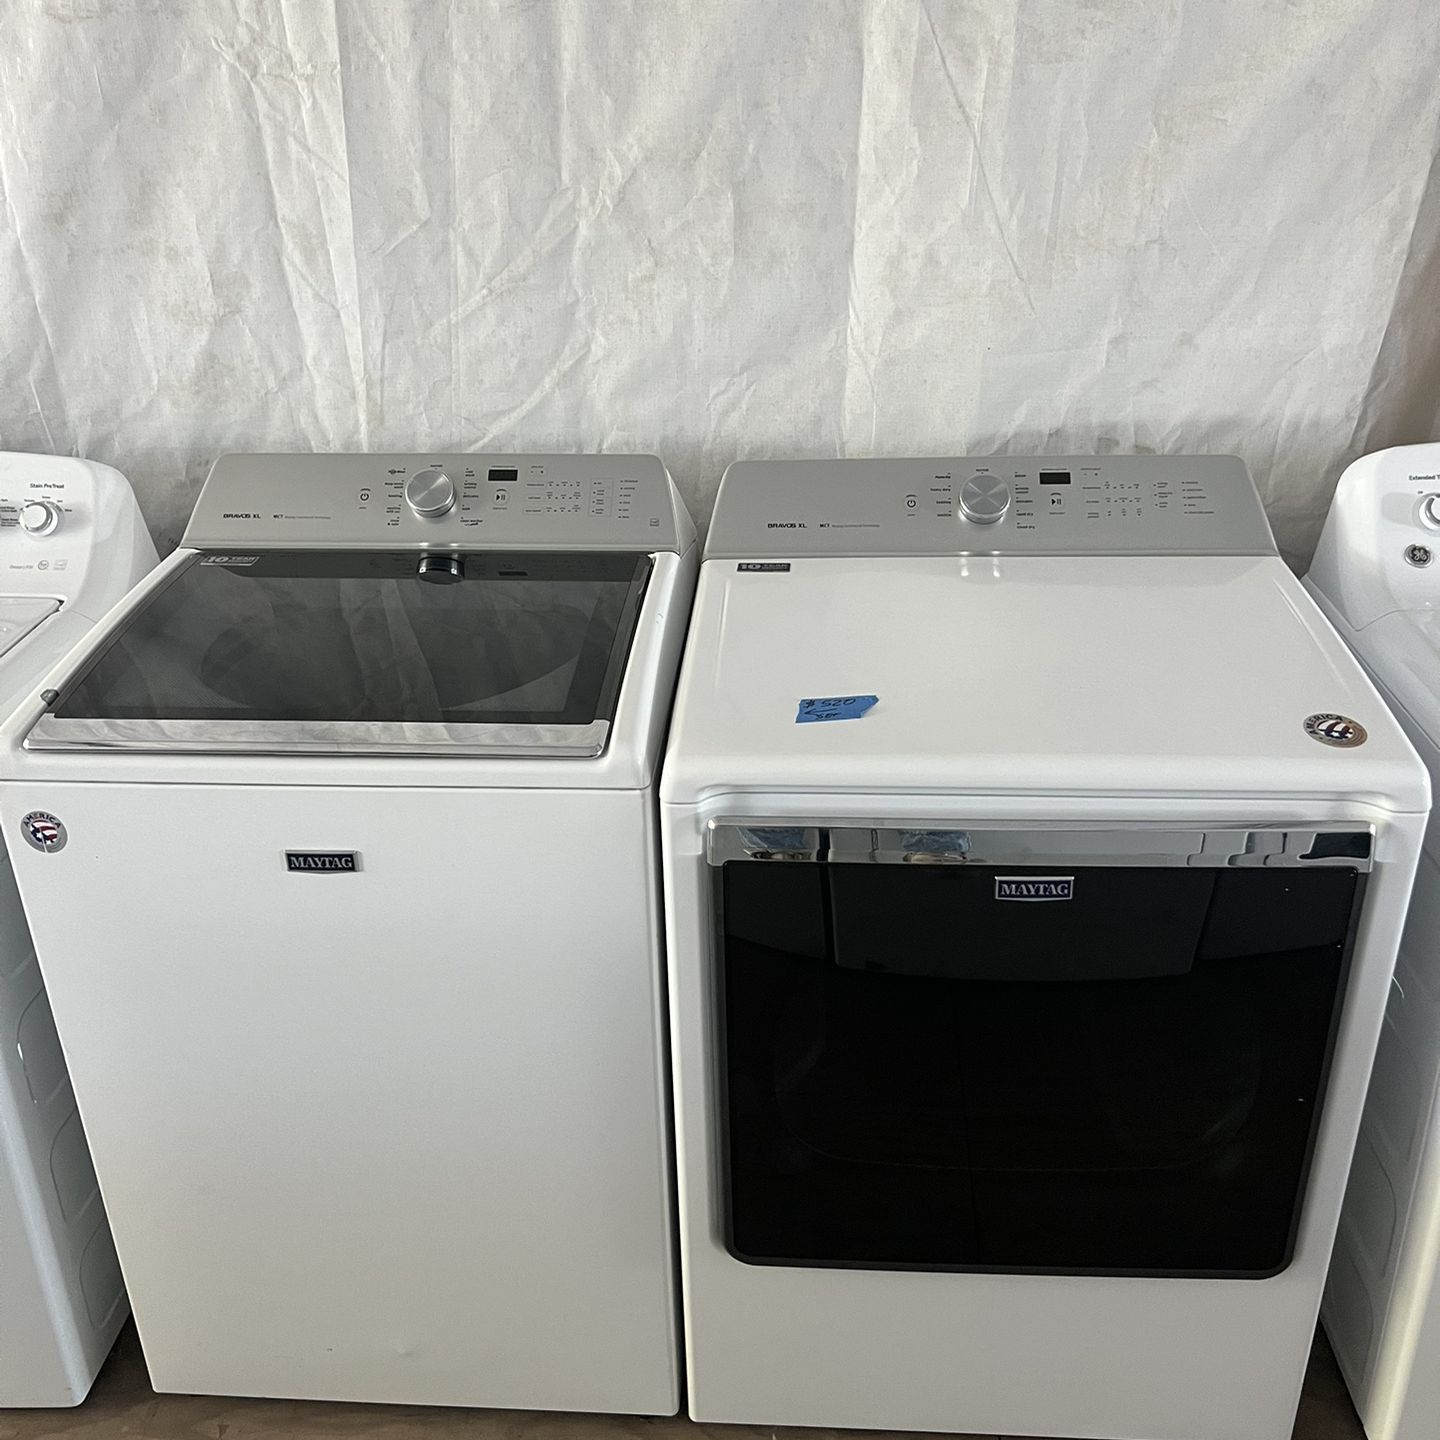 Maytag Washer&dryer Large Capacity Set   60 day warranty/ Located at:📍5415 Carmack Rd Tampa Fl 33610📍 